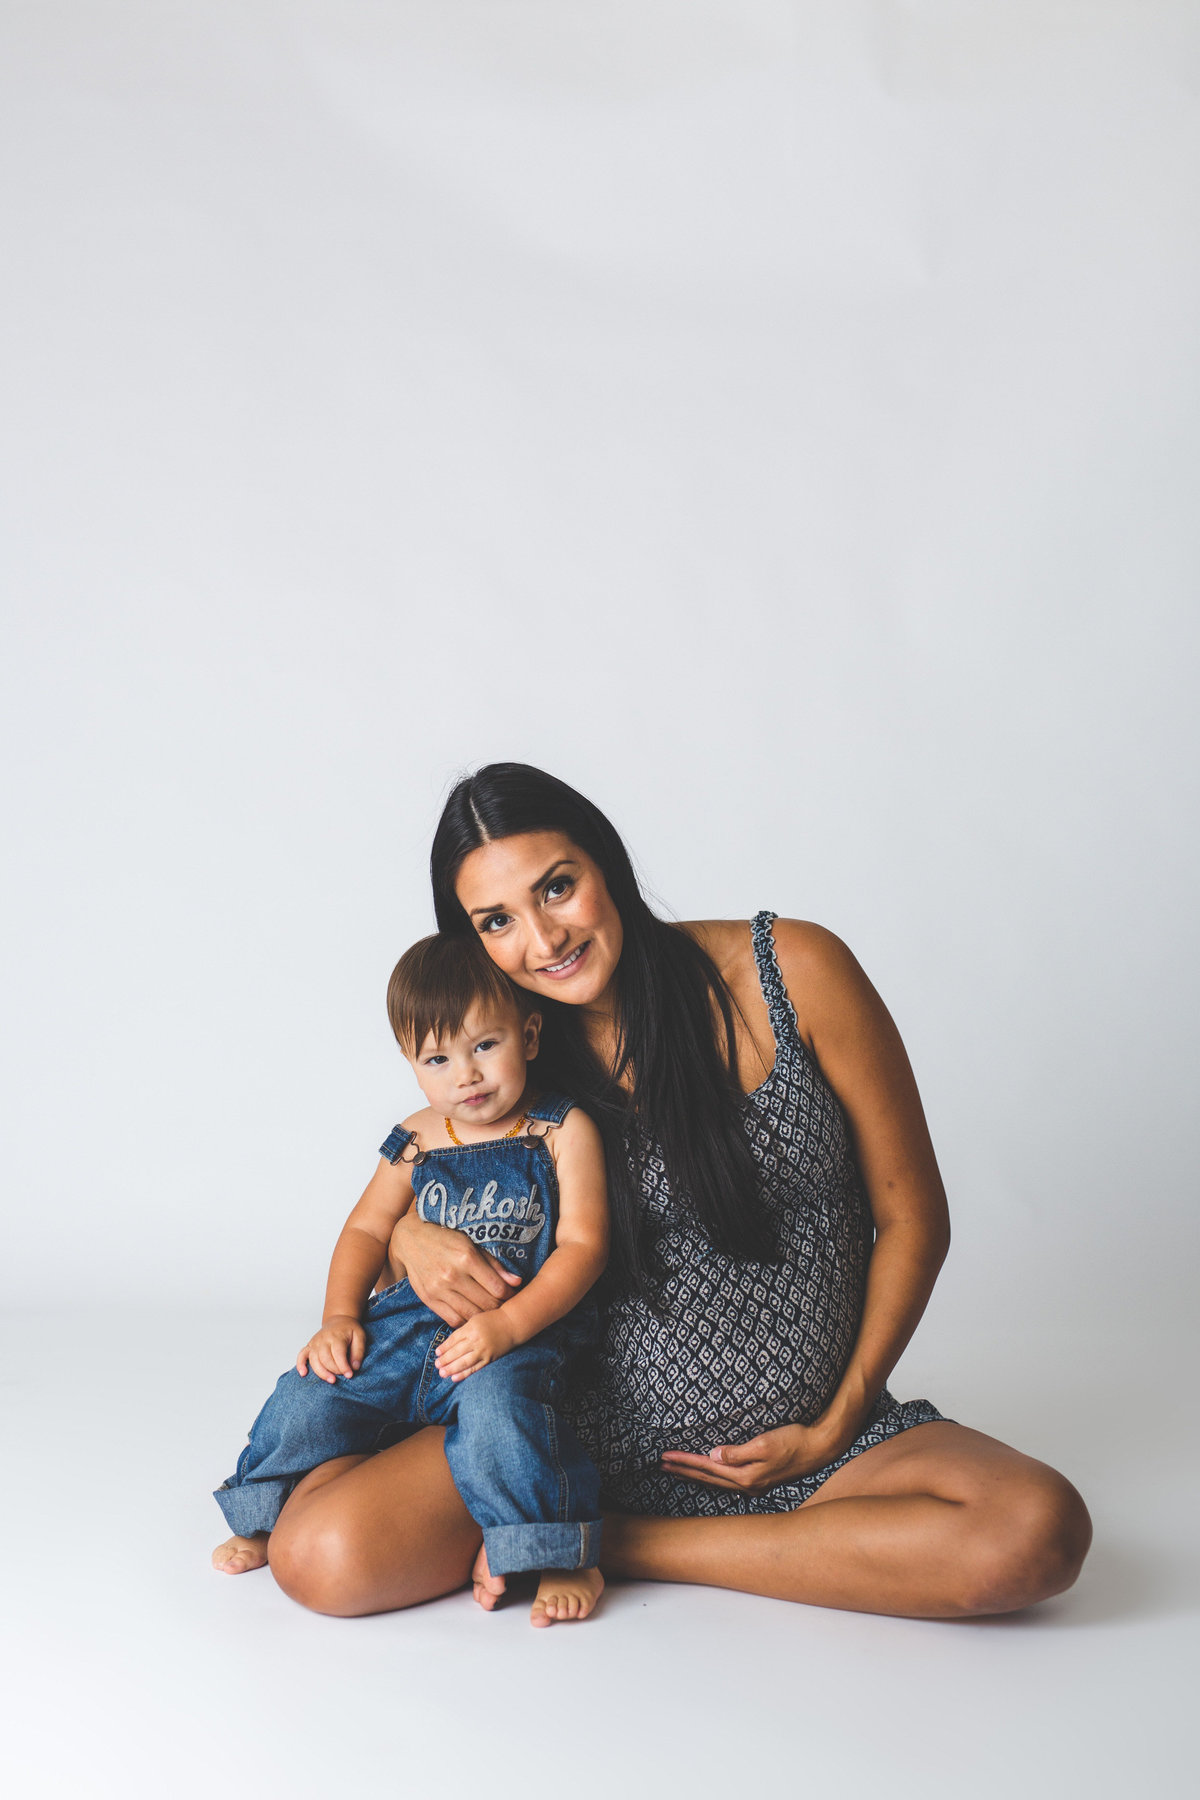 San Antonio In studio family maternity session on a white background with mother holding toddler son.